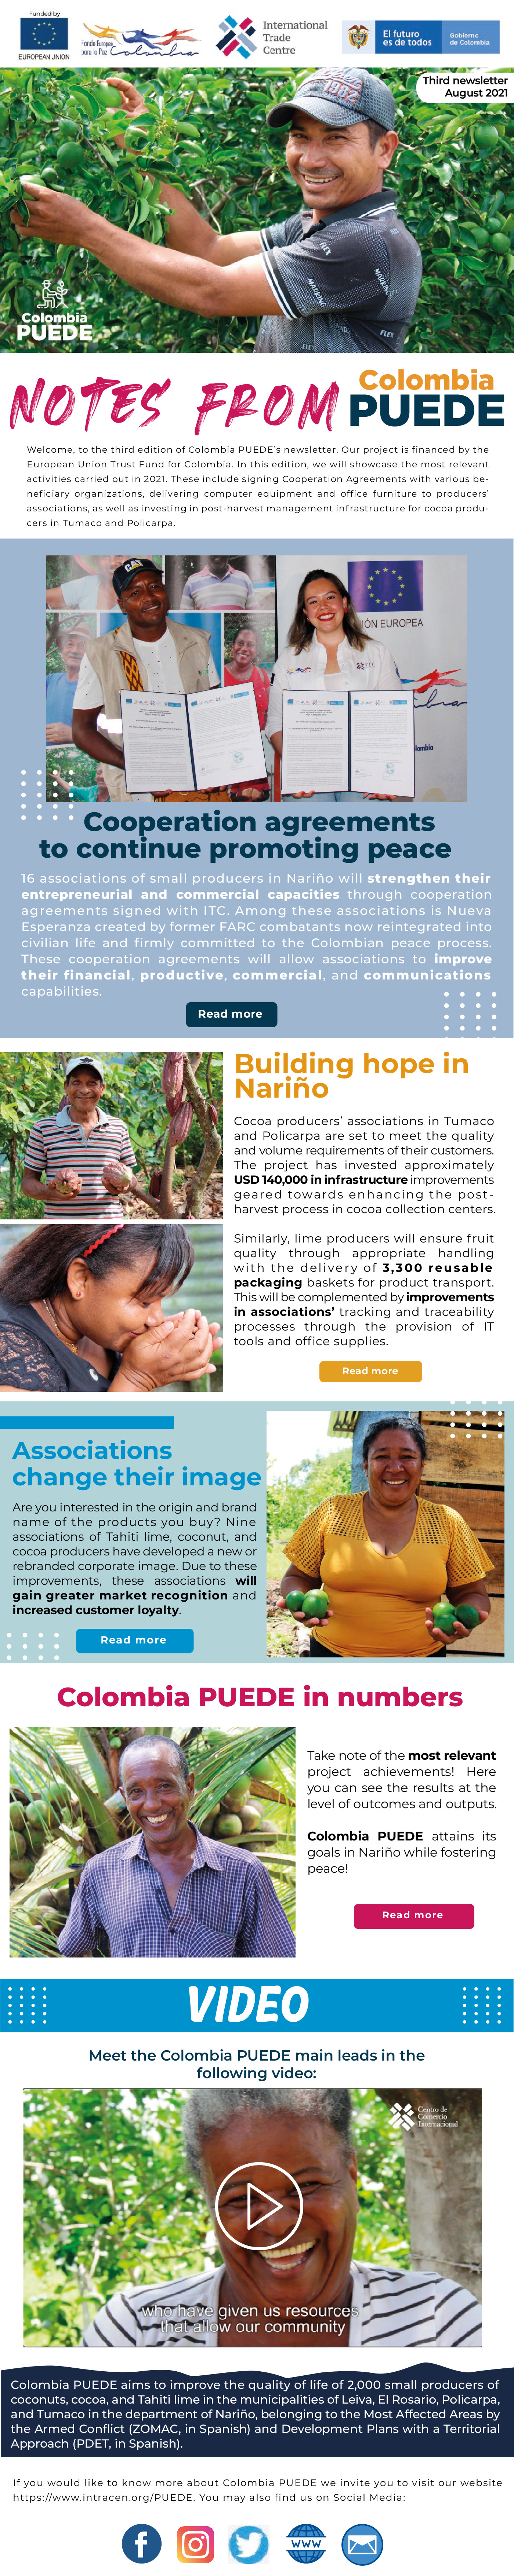 resources-colombia_puede-third_newsletter